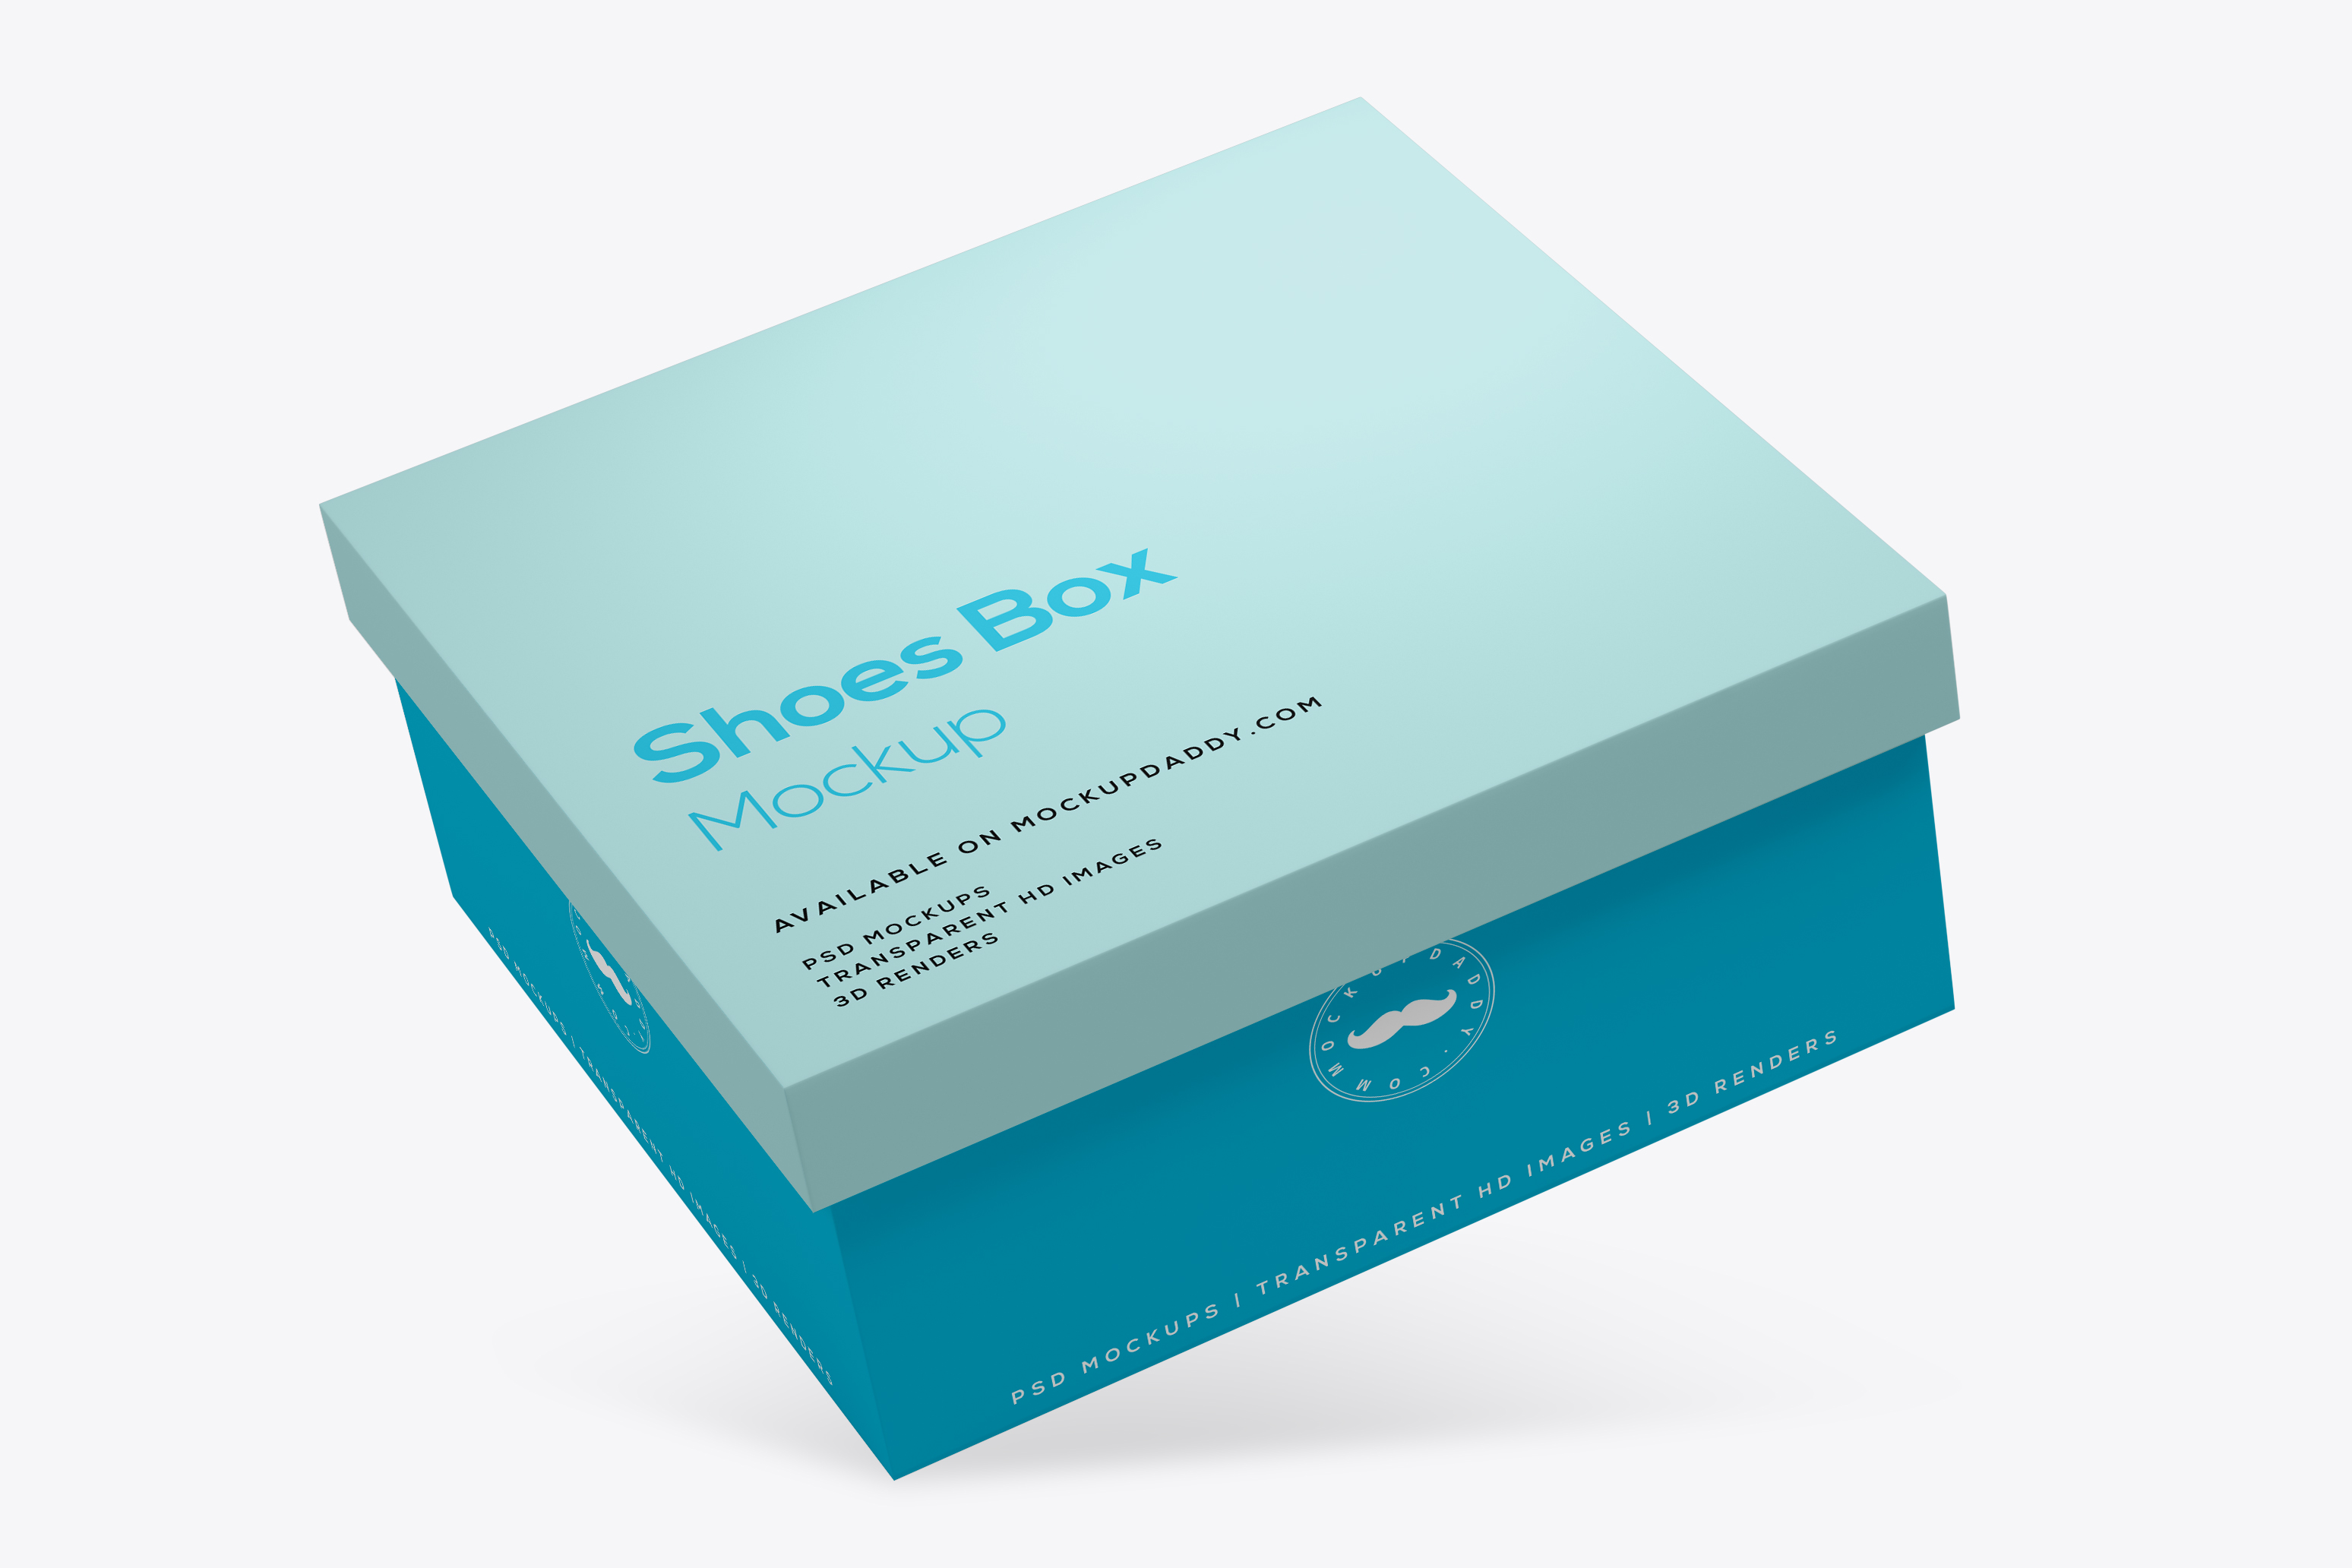 Download Square Box Mockup Free Download 24 Square Box Mockup Psd Free Download 2020 Graphic Cloud This Is A Set Of Square Psd Box Packaging Mockup To Display Your Branding And Packaging Designs